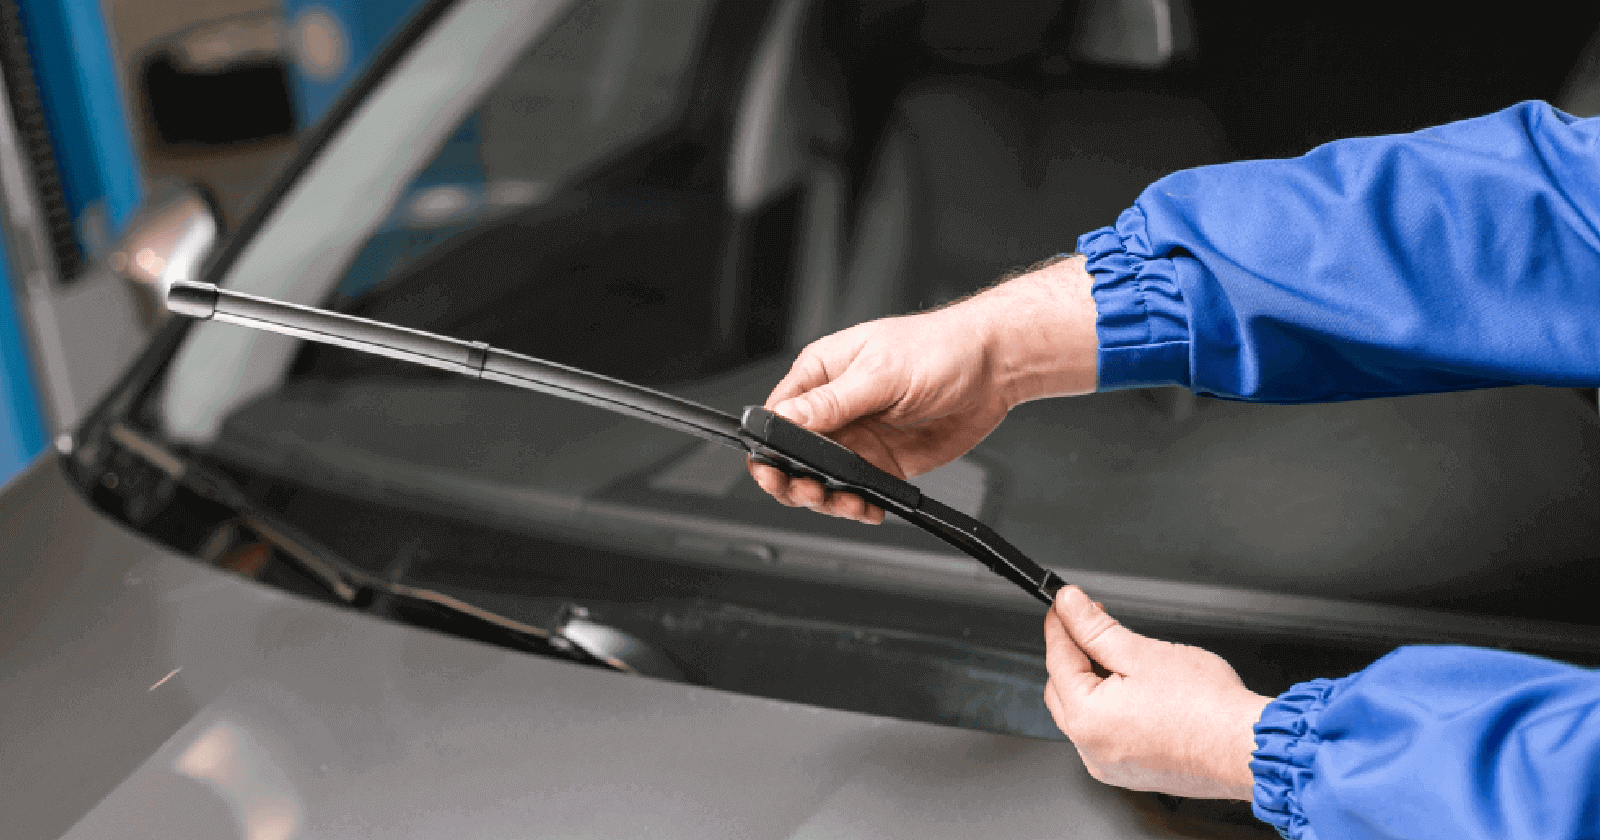 How To Change Wiper Blades On A Car